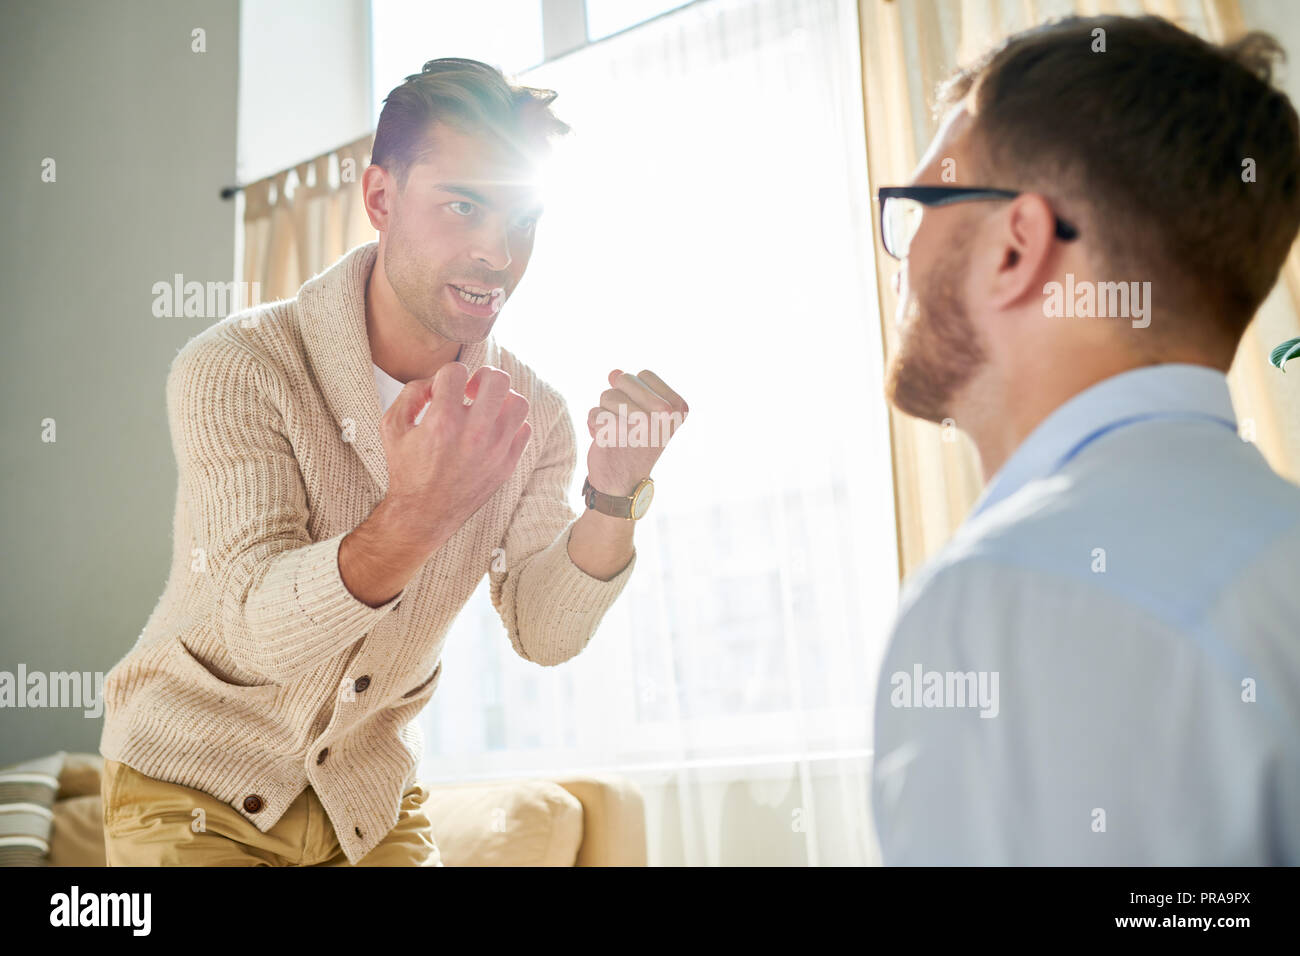 Therapy Session Stock Photo